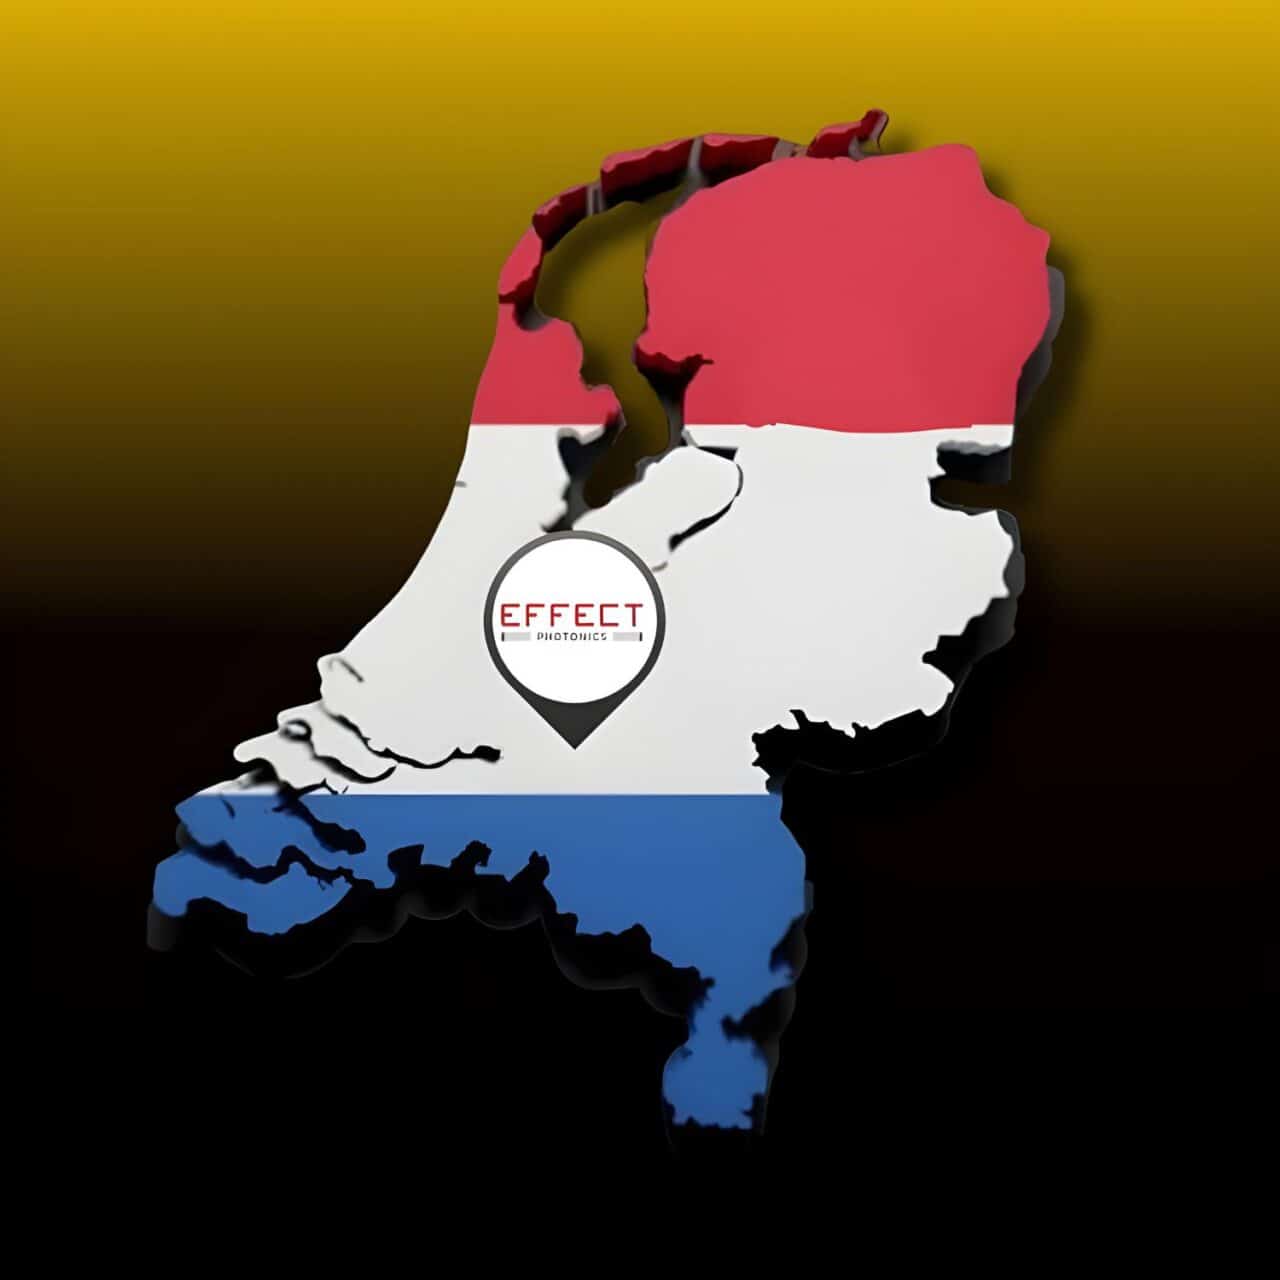 a map of Netherlands on a yellow & black background with Effect Photonics logo presenting company's geo location